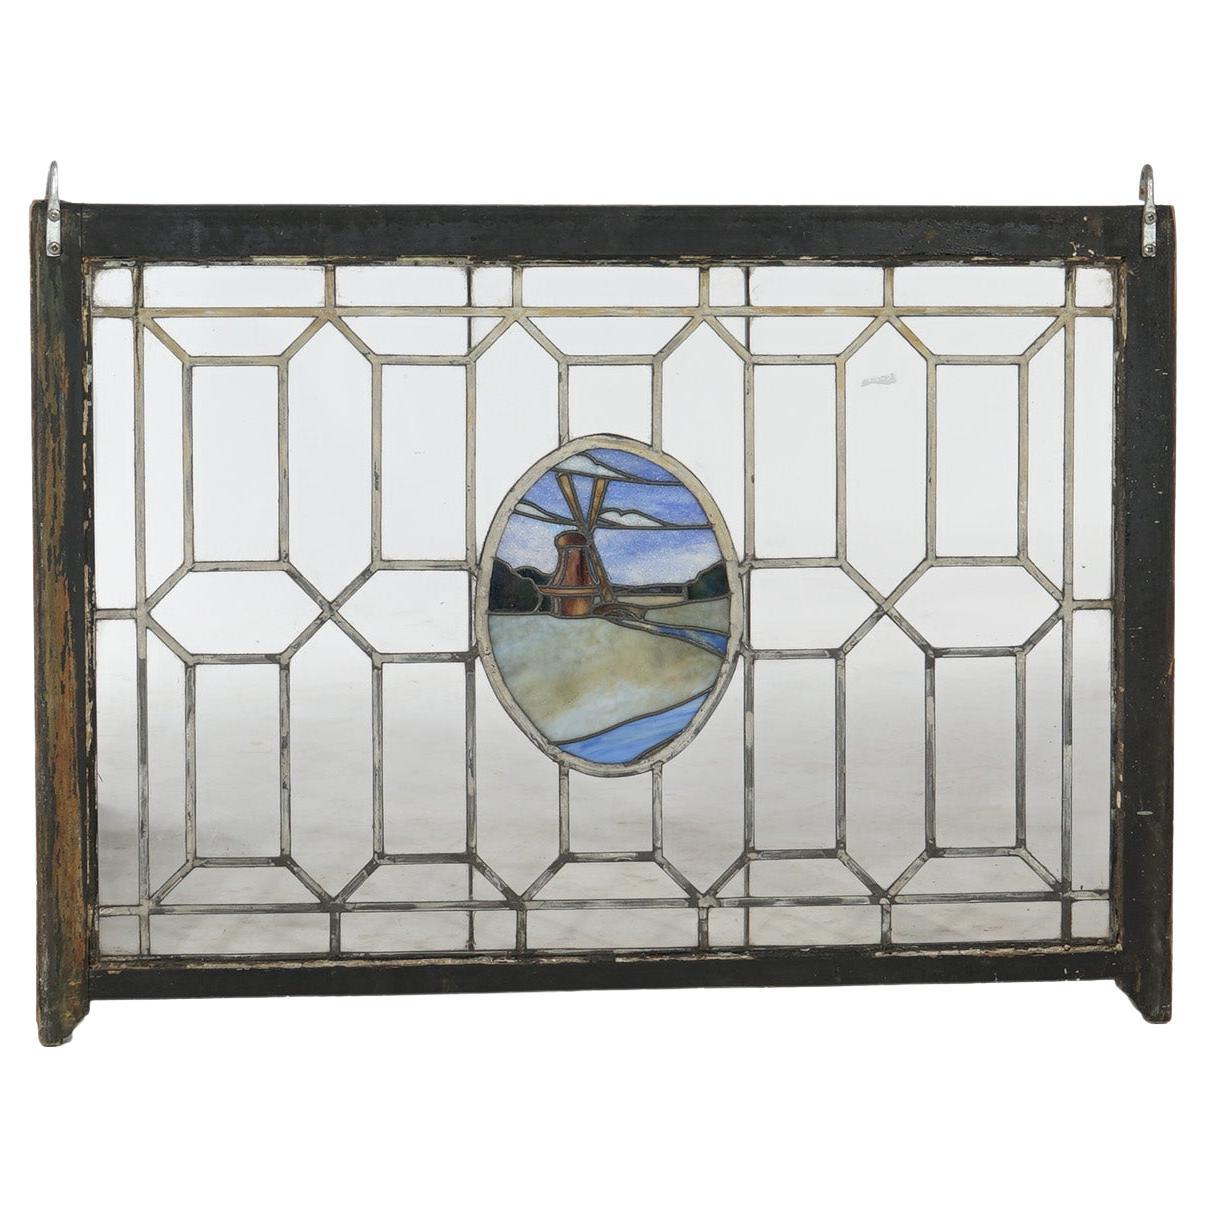 Antique Arts & Crafts Leaded & Stained Glass Window with Windmill, c1910